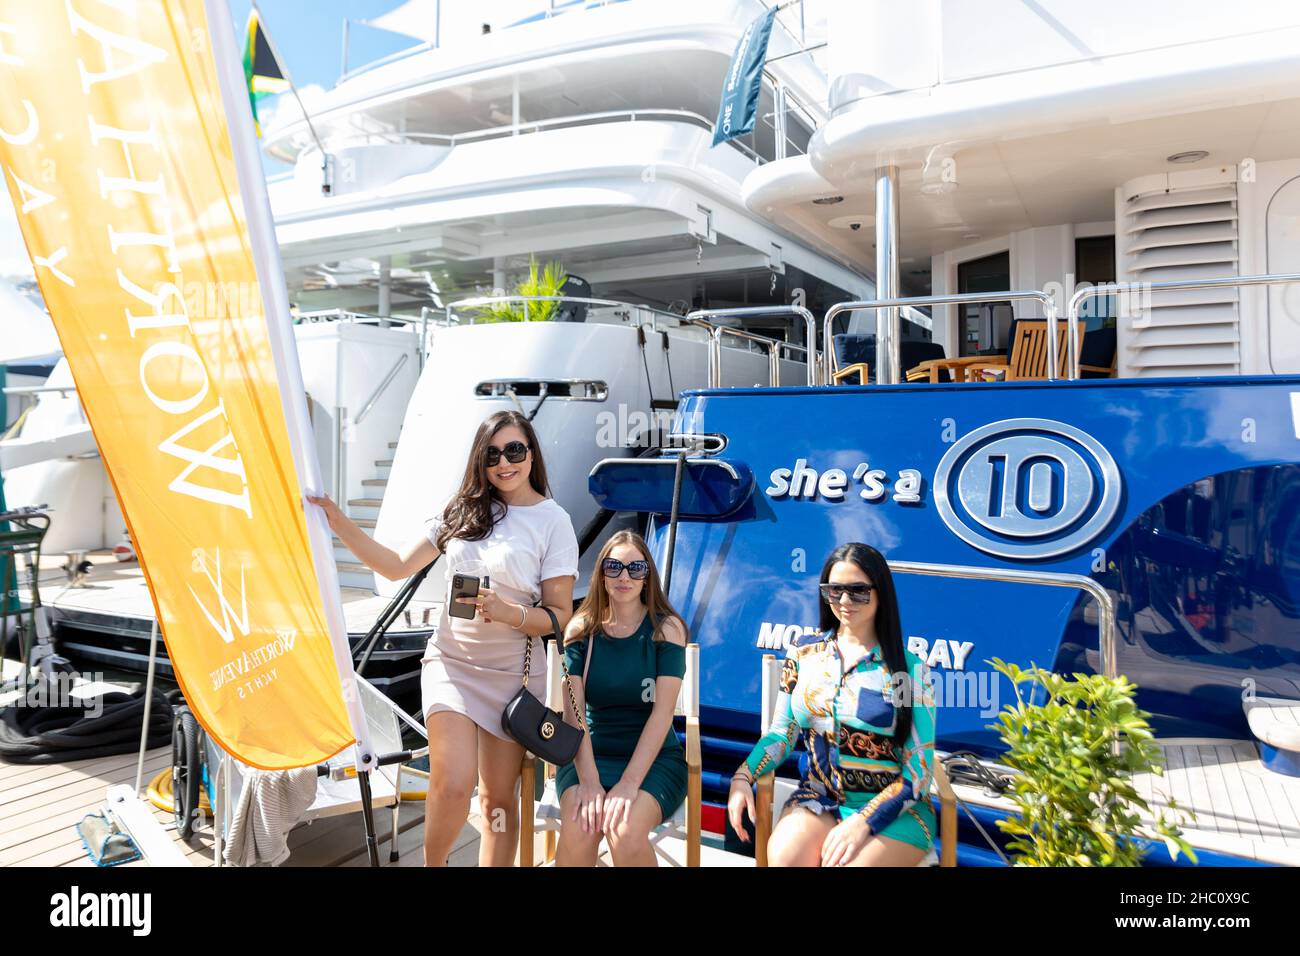 62nd annual Fort Lauderdale International Boat Show. Smaller deck boats, Cuddy cabin boats, Pontoon boats, Surf boat, Jet boats, Alum Fishing Boats. Stock Photo